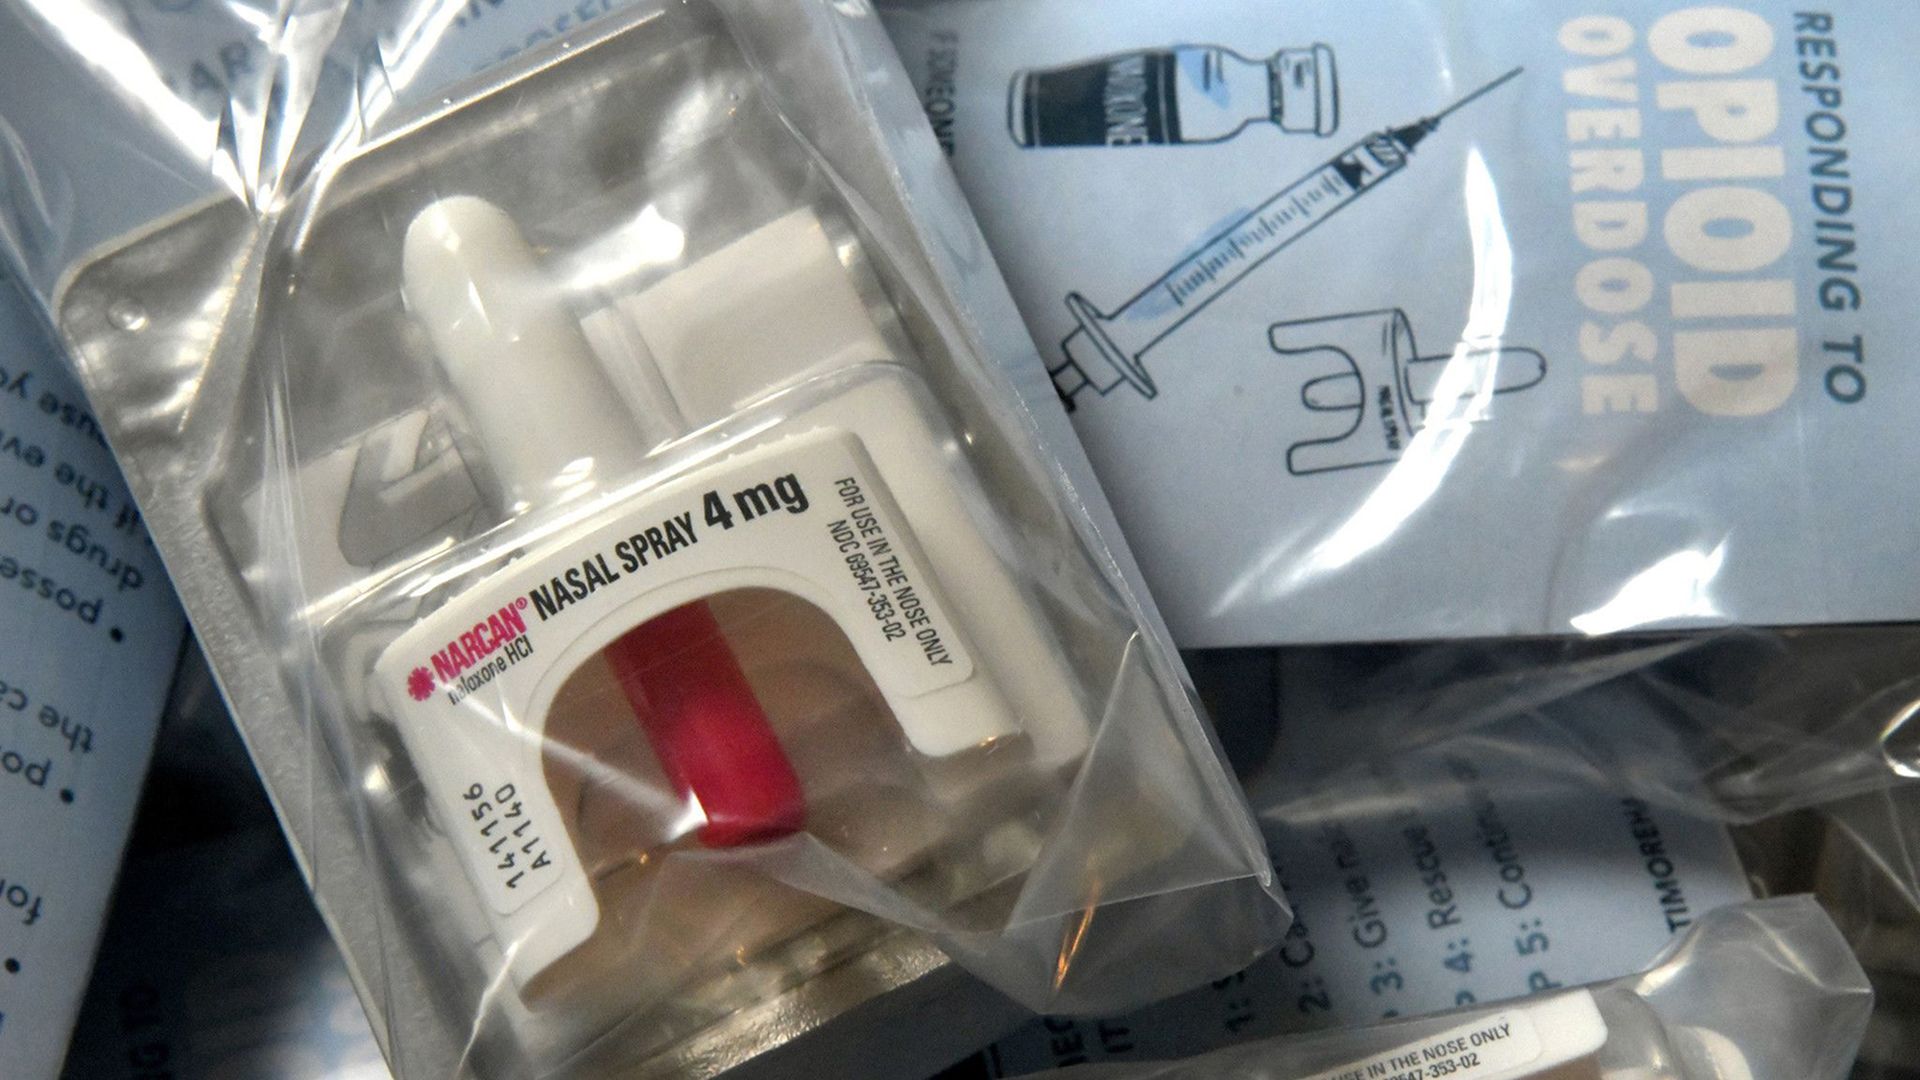 Image of individually packages Narcan inhalers that can reverse the effects of an opioid overdose.